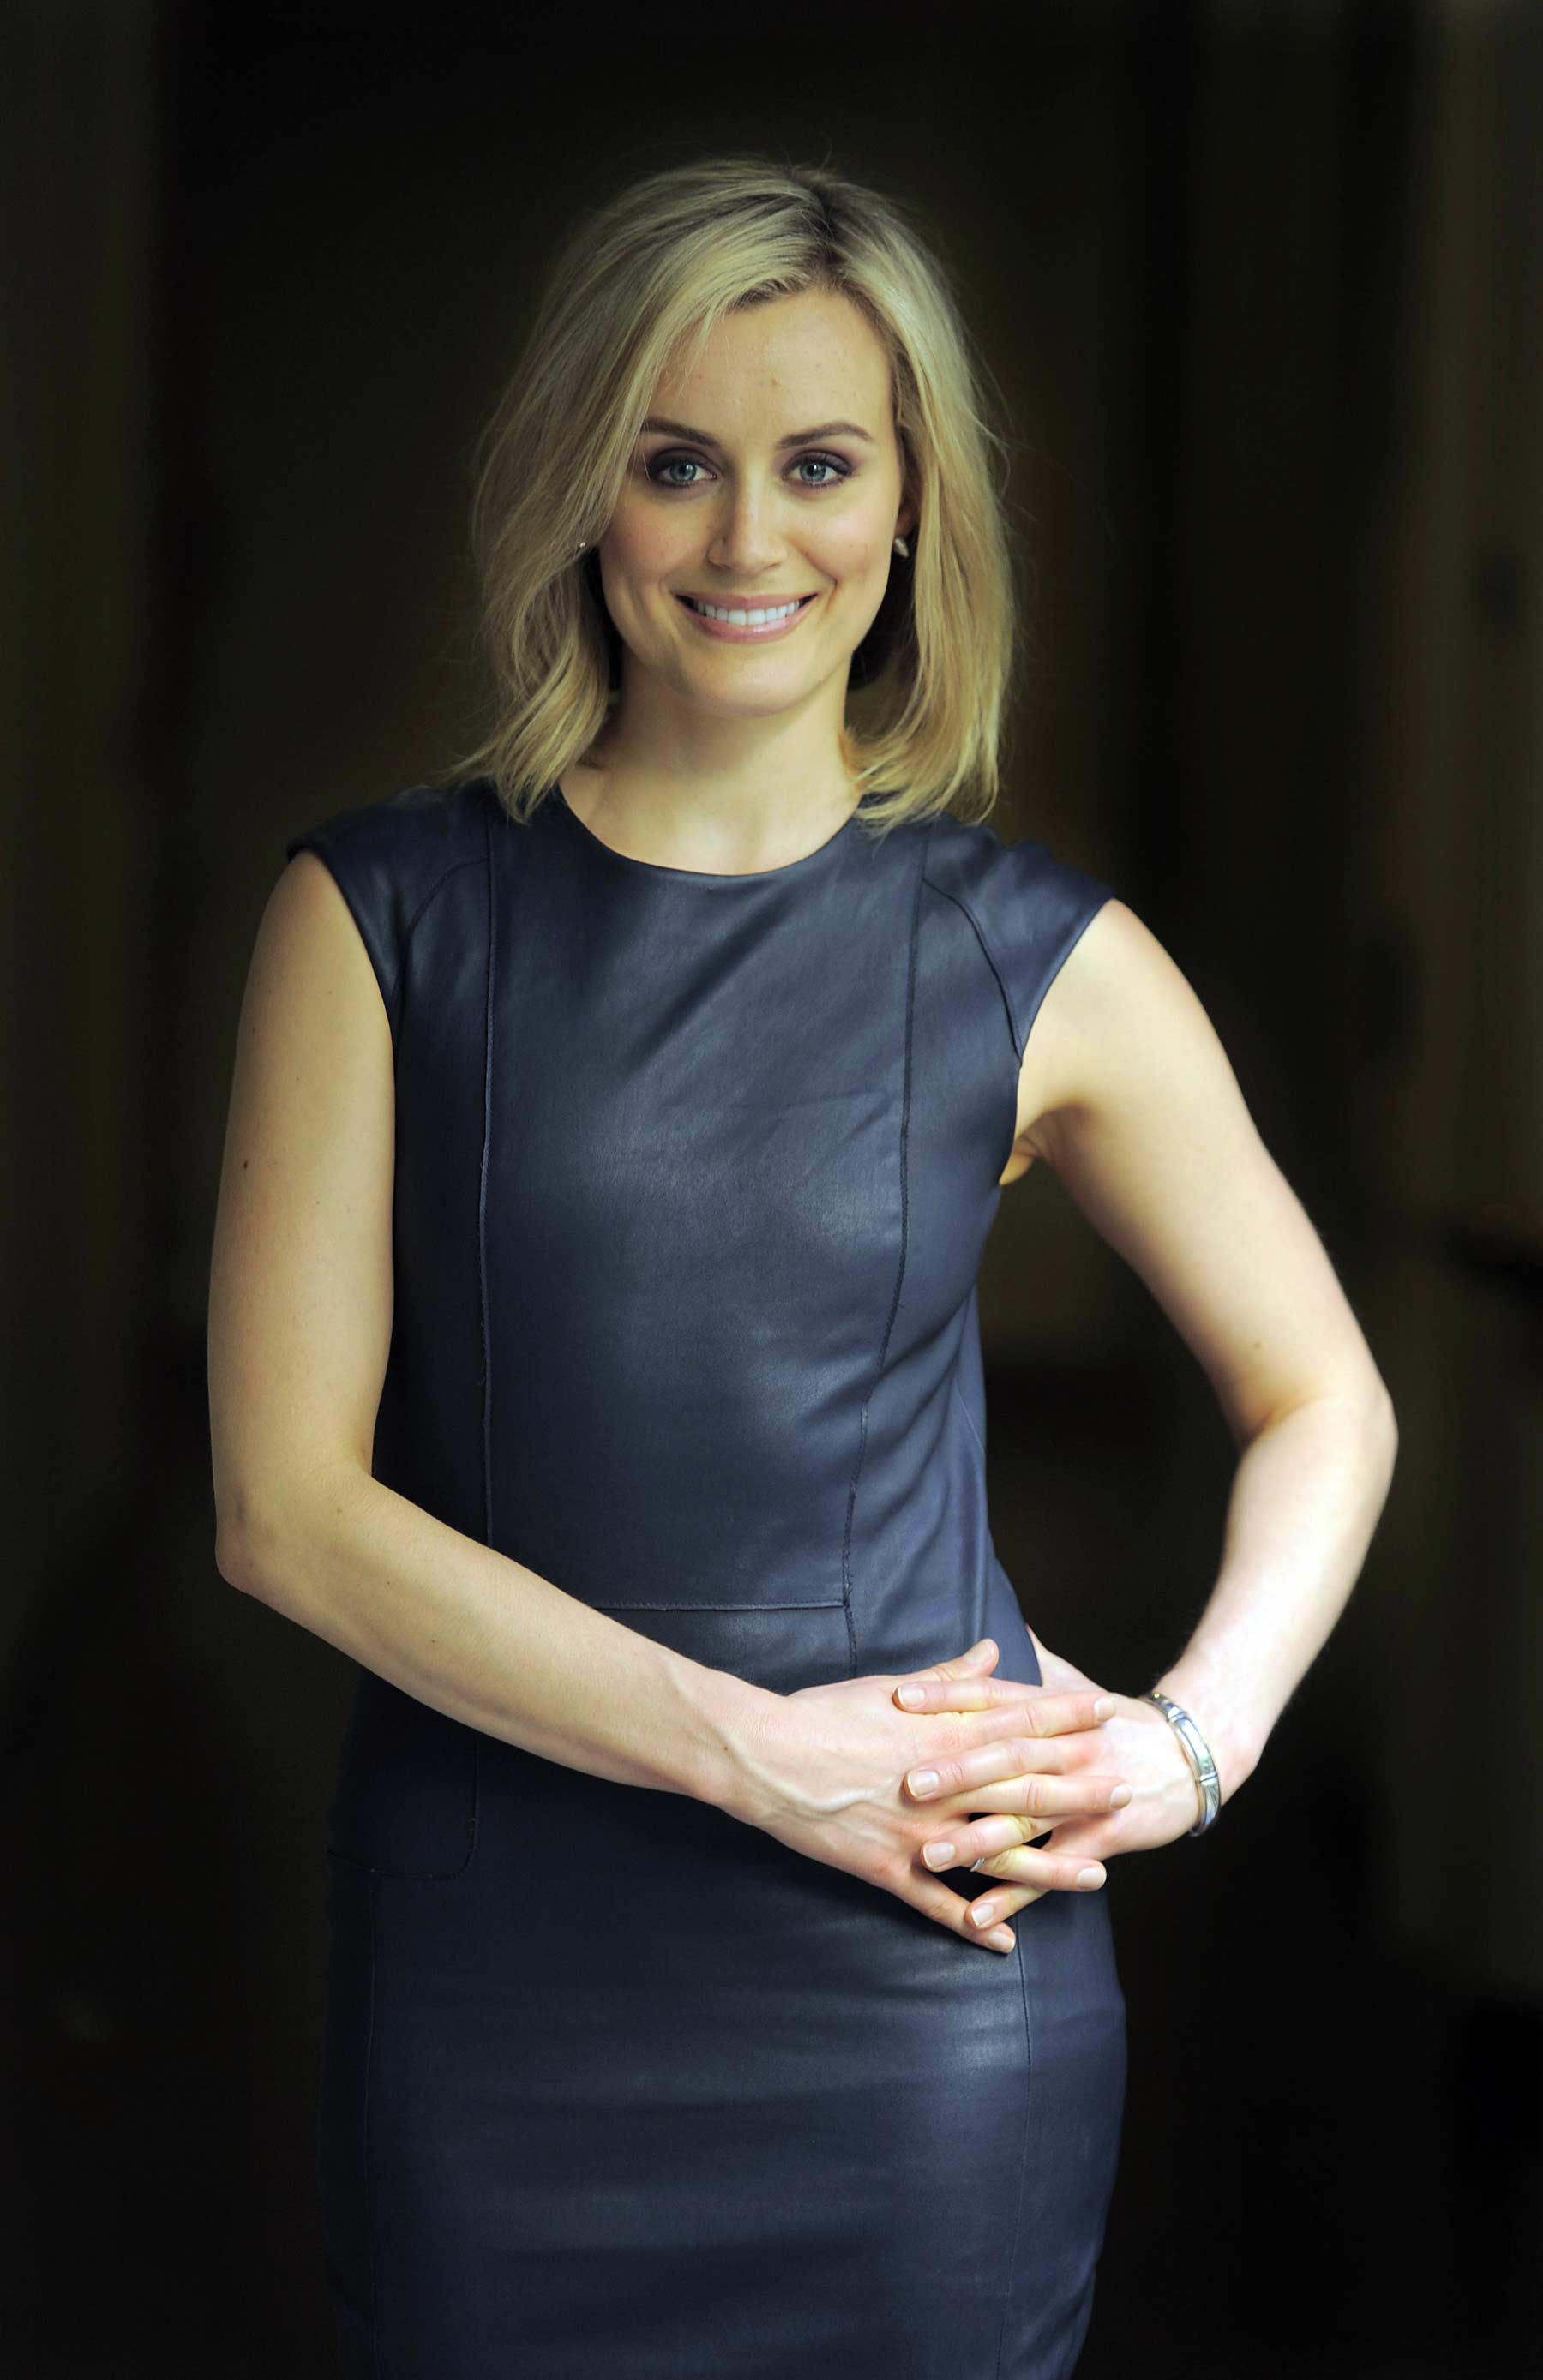 Taylor Schilling photoshoot by Chris Pizzello